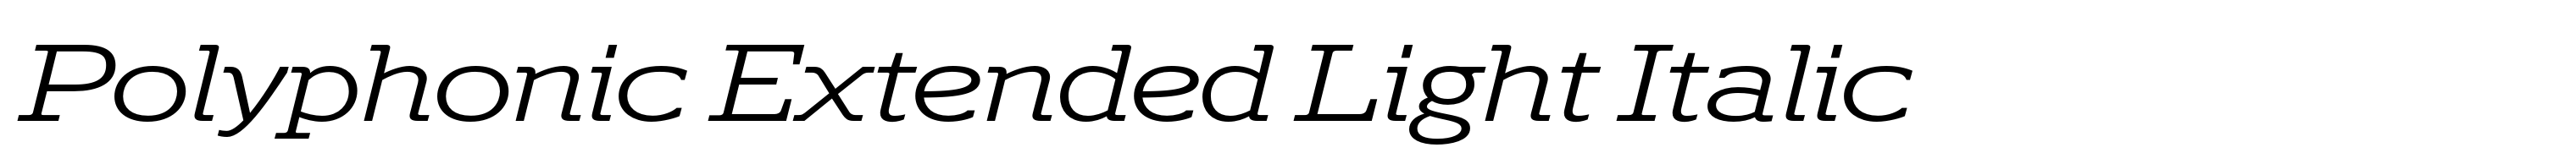 Polyphonic Extended Light Italic